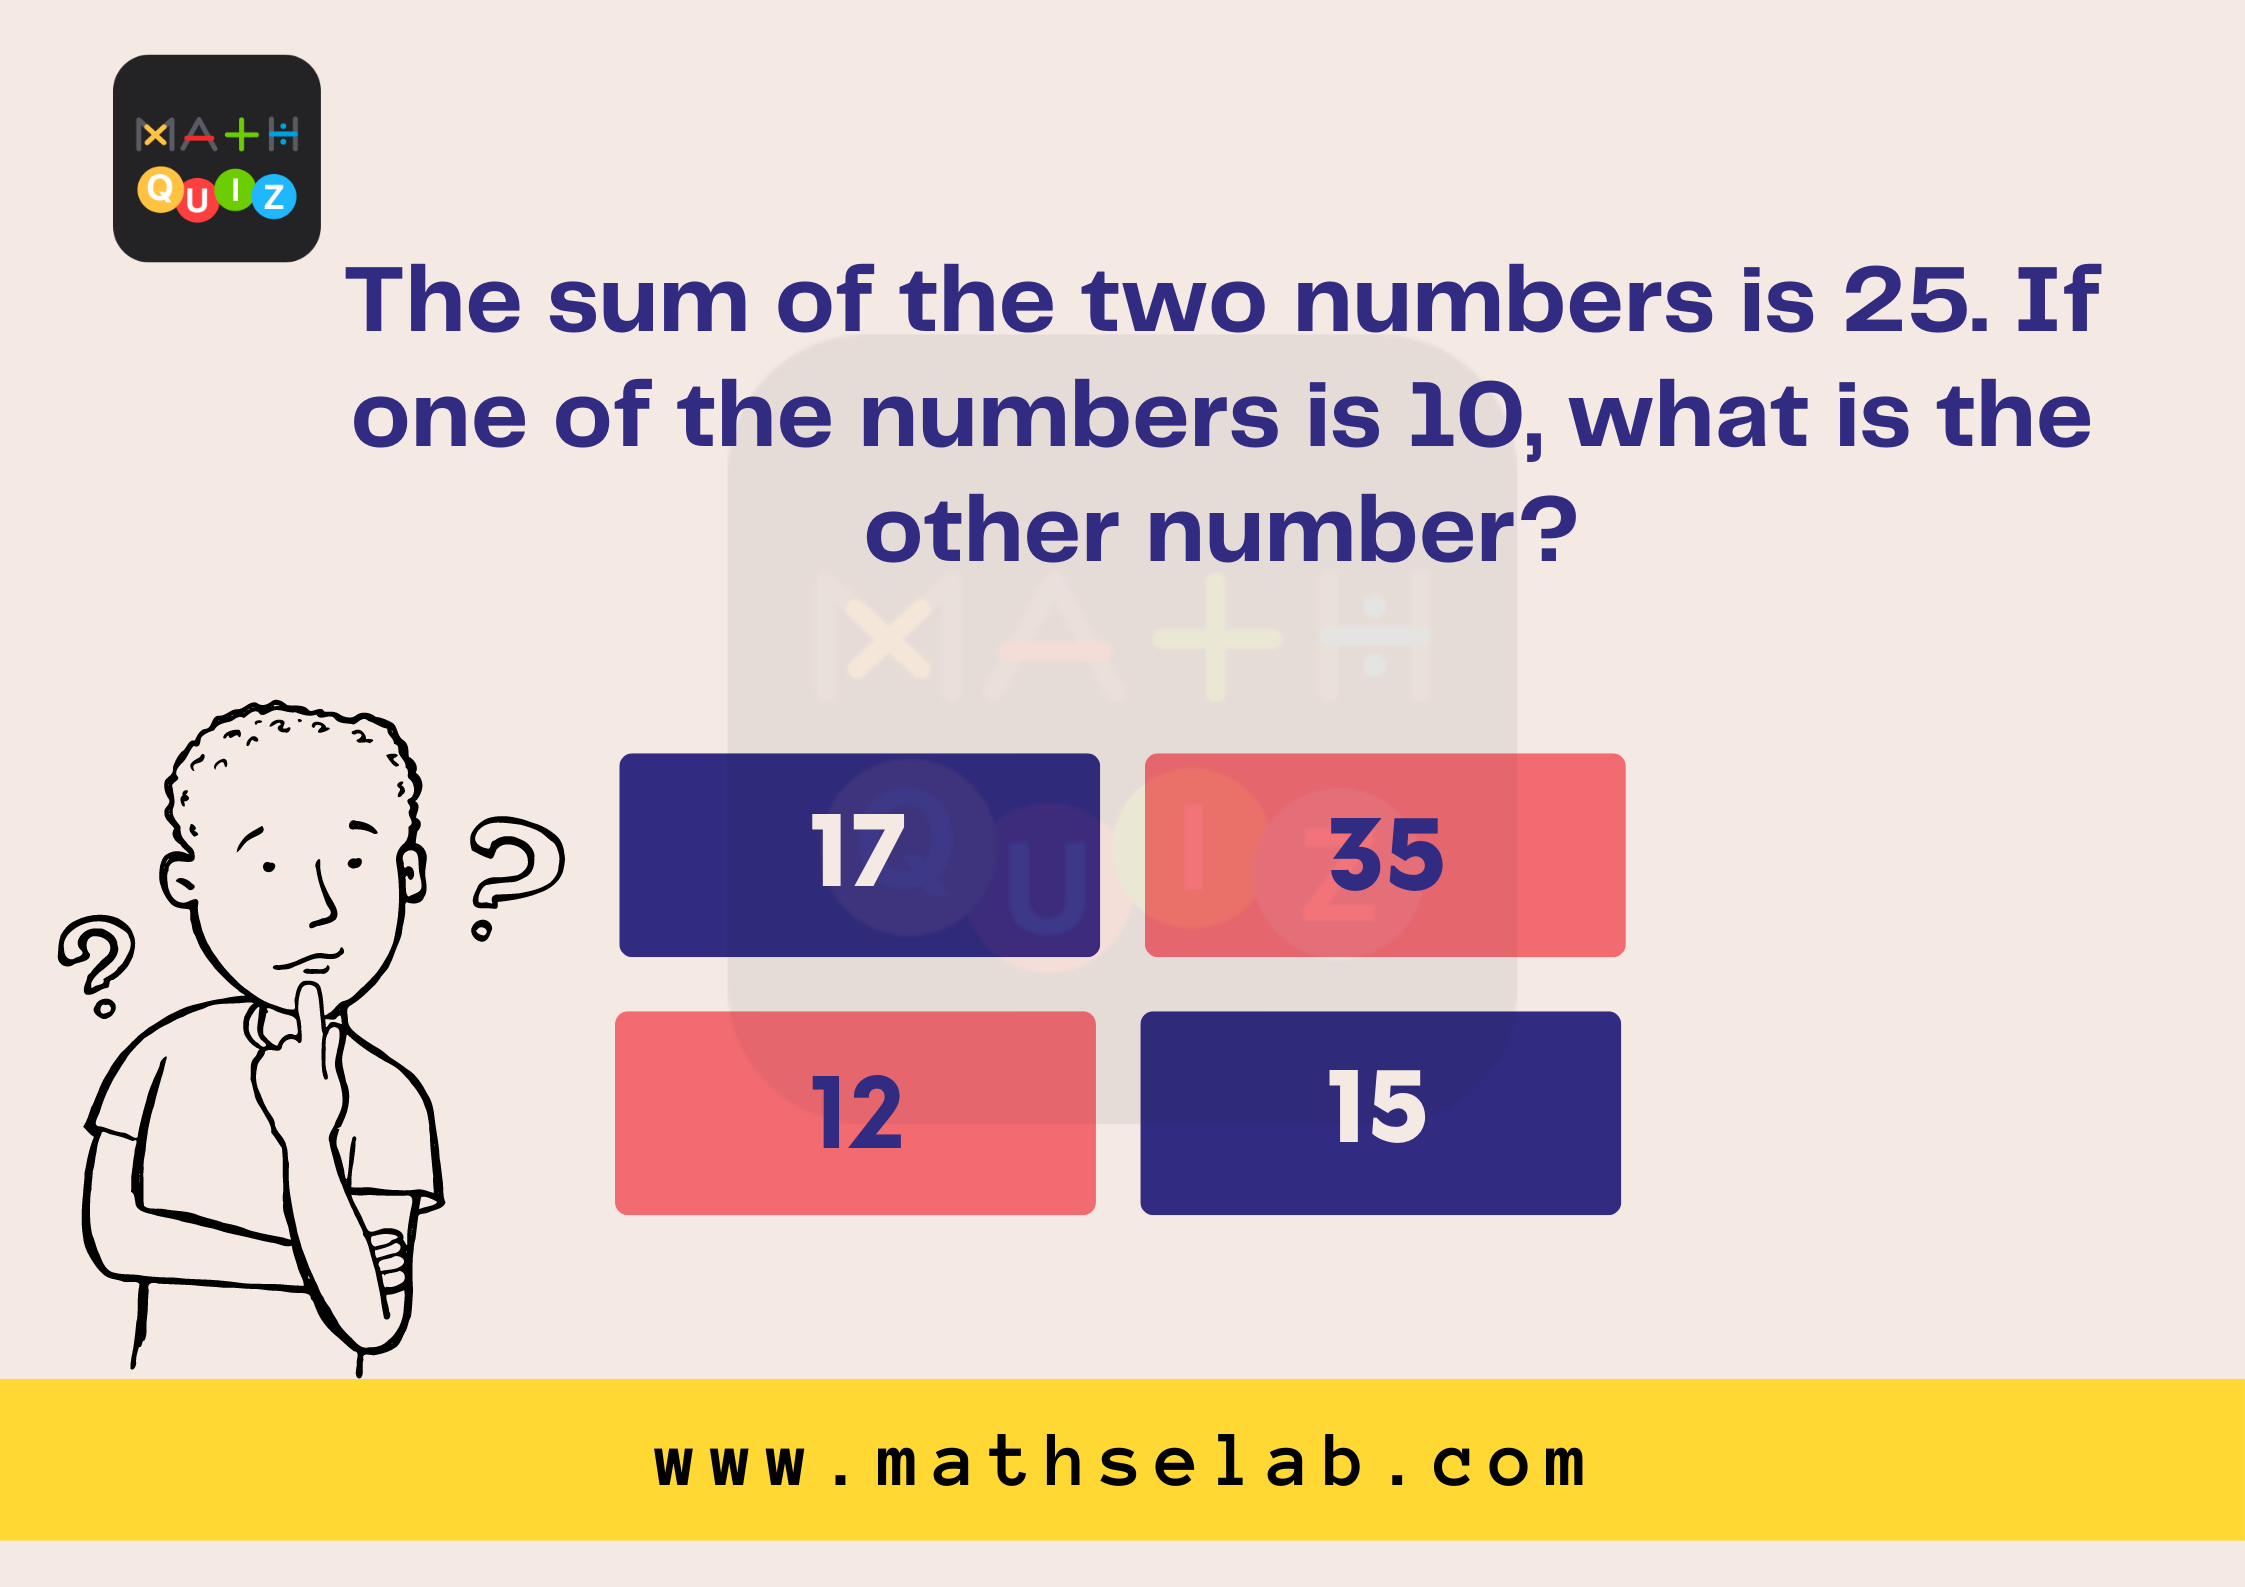 The sum of the two numbers is 25. If one of the numbers is 10, what is the other number?